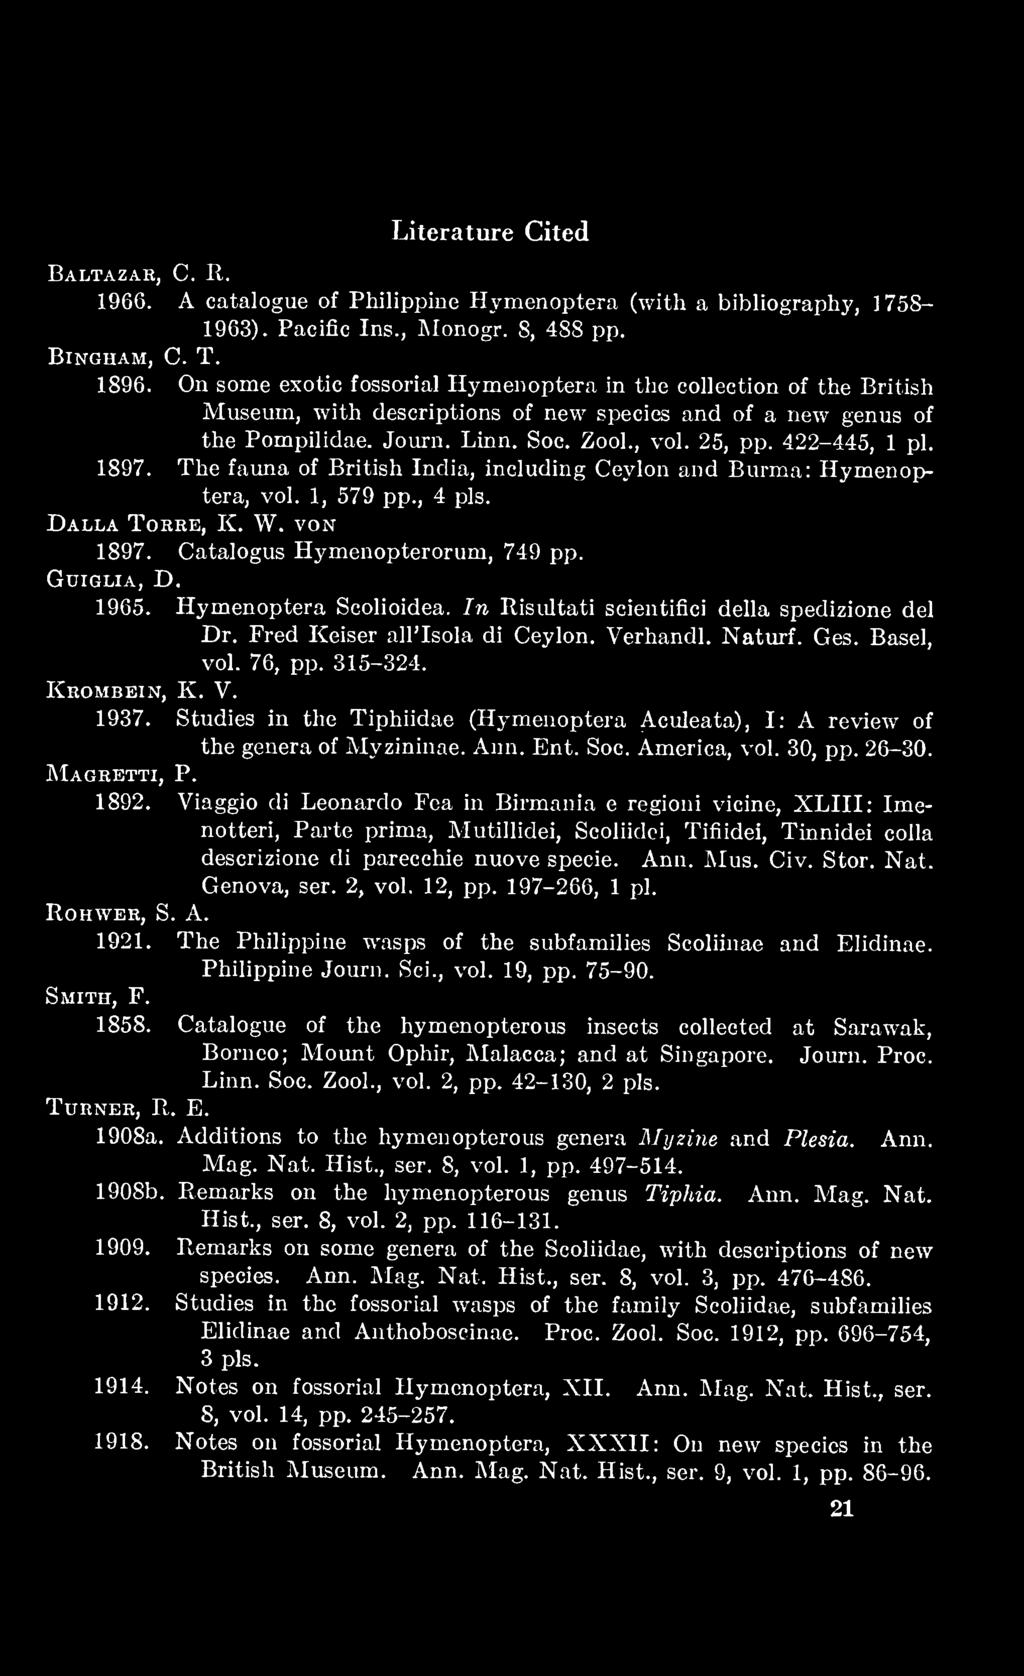 Studies in the Tiphiidae (Hymenoptera Aculeata), I: A review of Magretti, P. the genera of Myzininae. Ann. Ent. Soc. America, vol. 30, pp. 26-30. 1892.